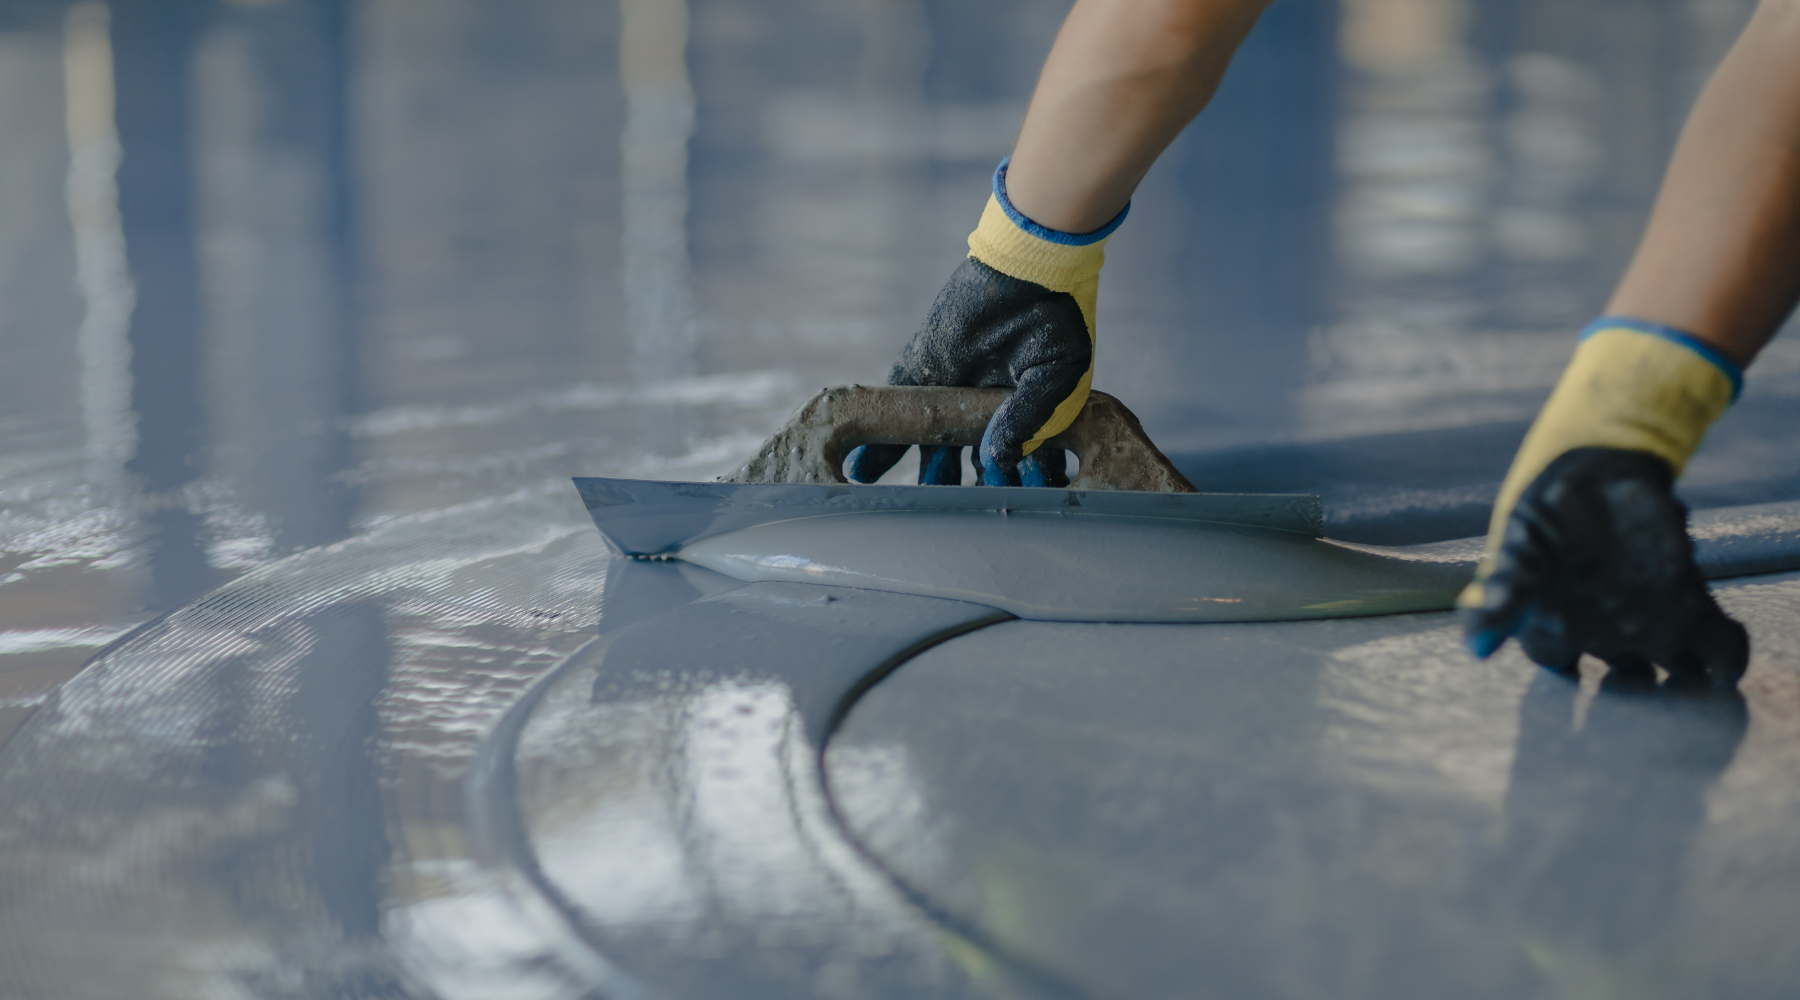 A person wearing protective gloves smooths out a freshly applied layer of epoxy resin on a large surface with a metallic squeegee tool, reflecting a meticulous and professional application process